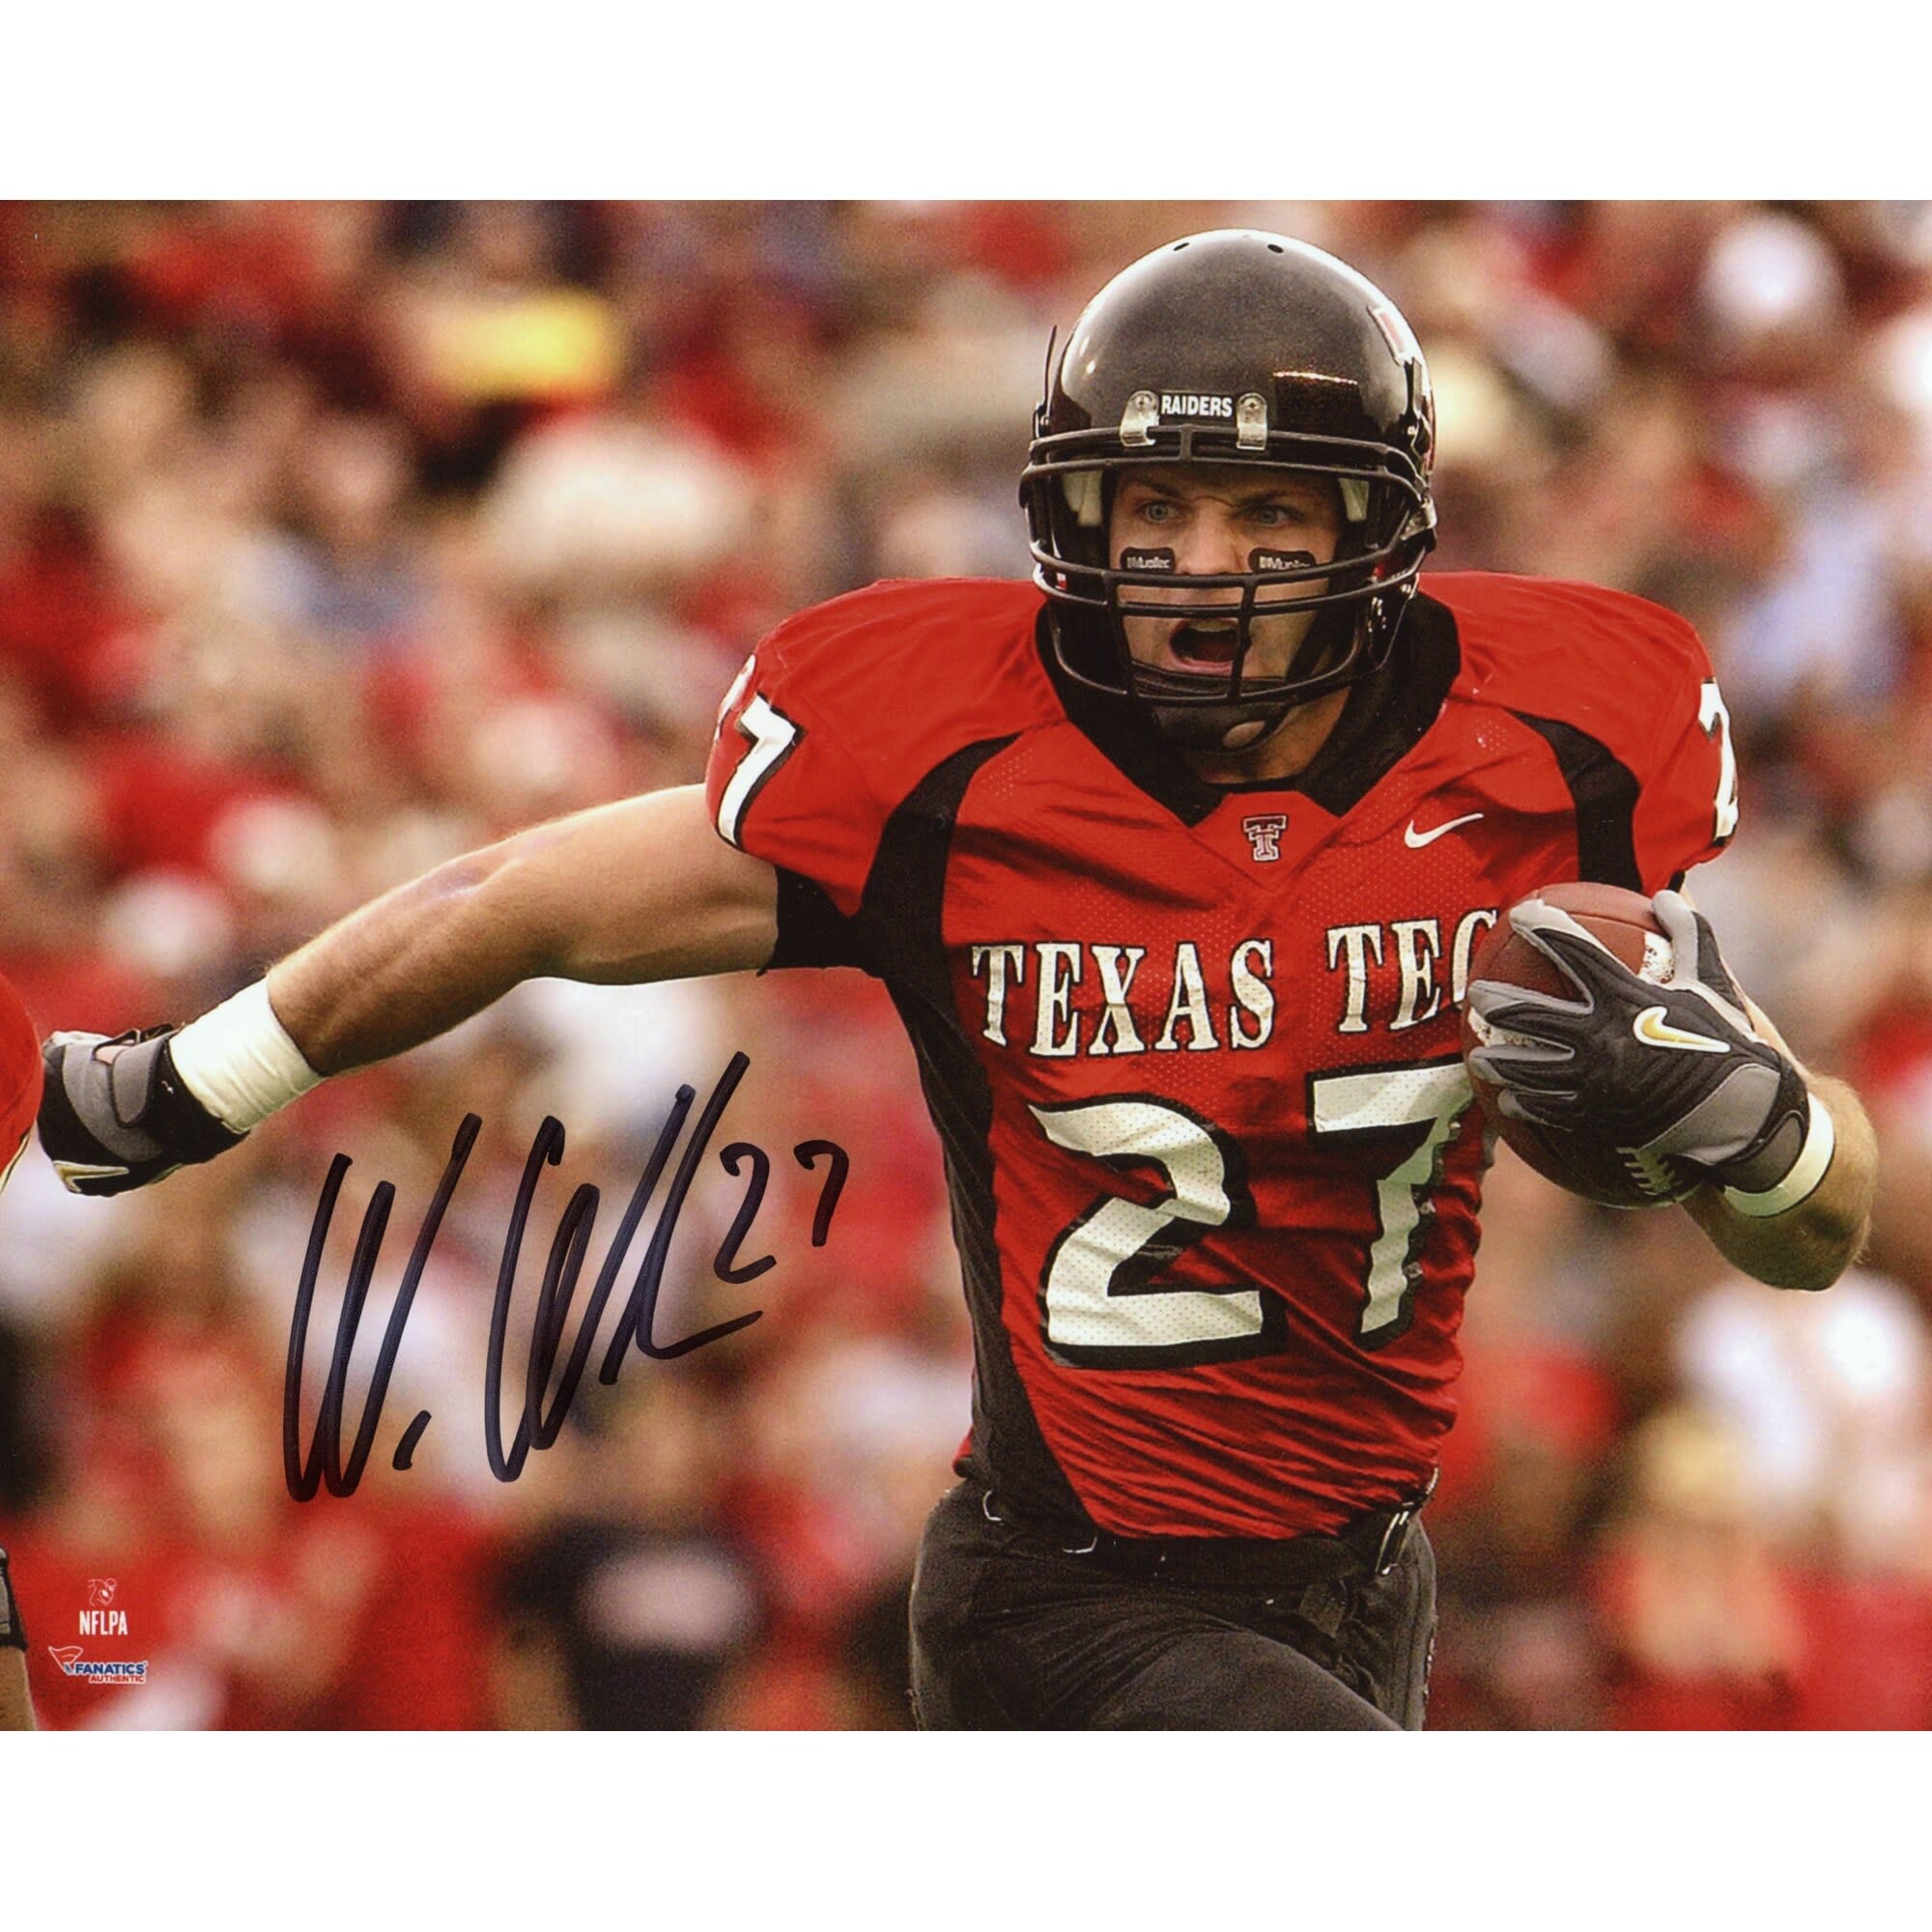 You need these Texas Tech Red Raiders collectibles